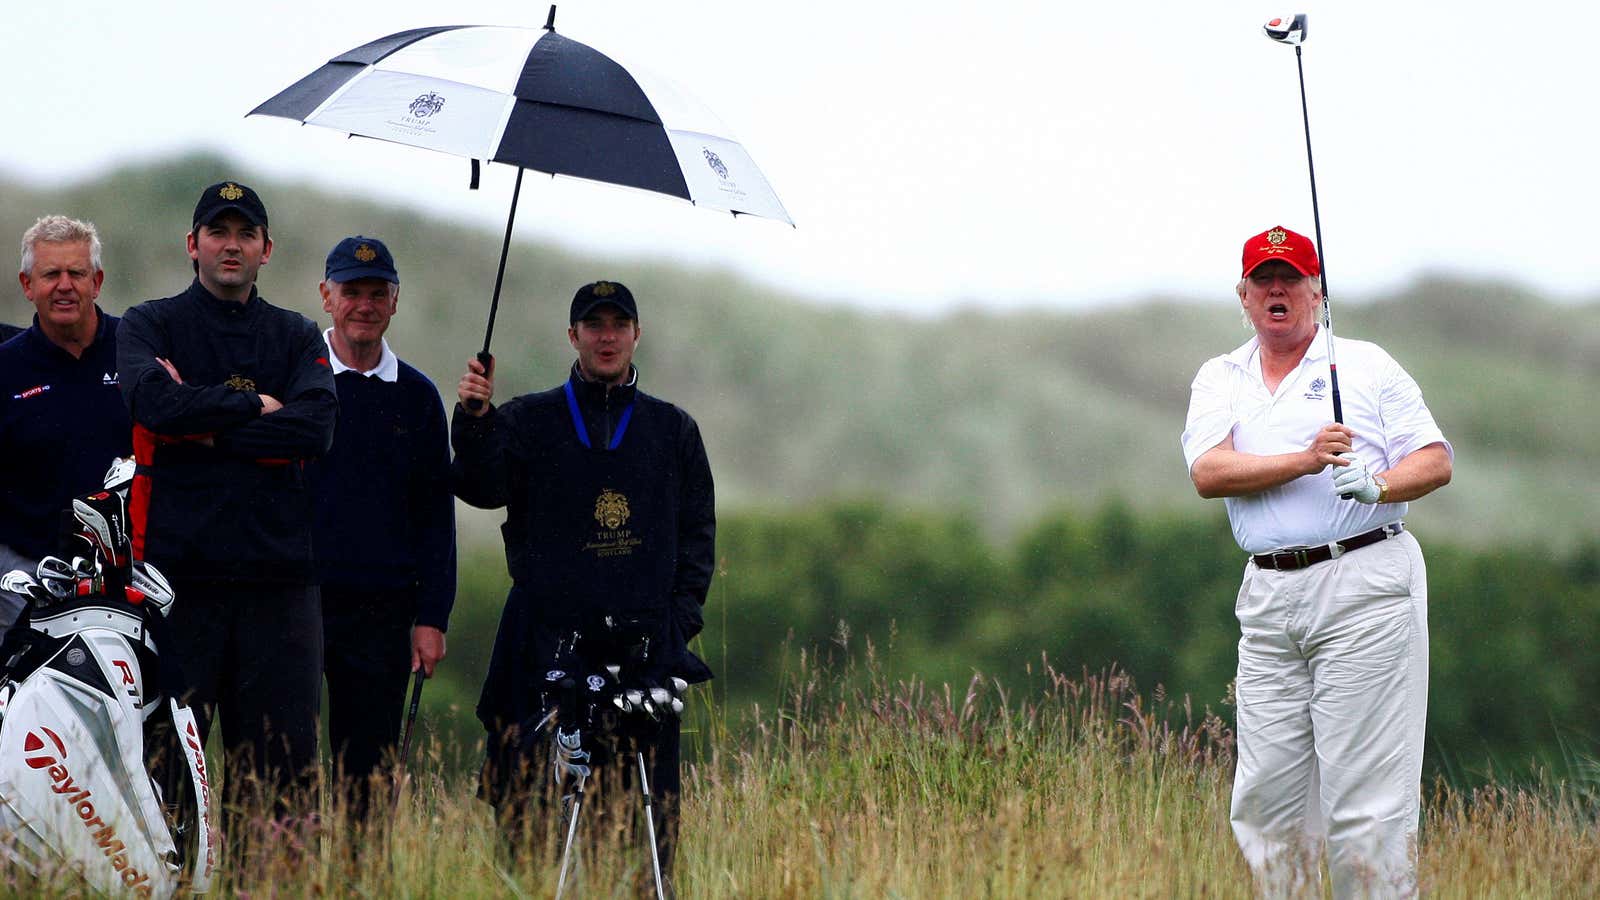 Trump plays at the opening of his loss-making course in Aberdeen, Scotland in 2012.